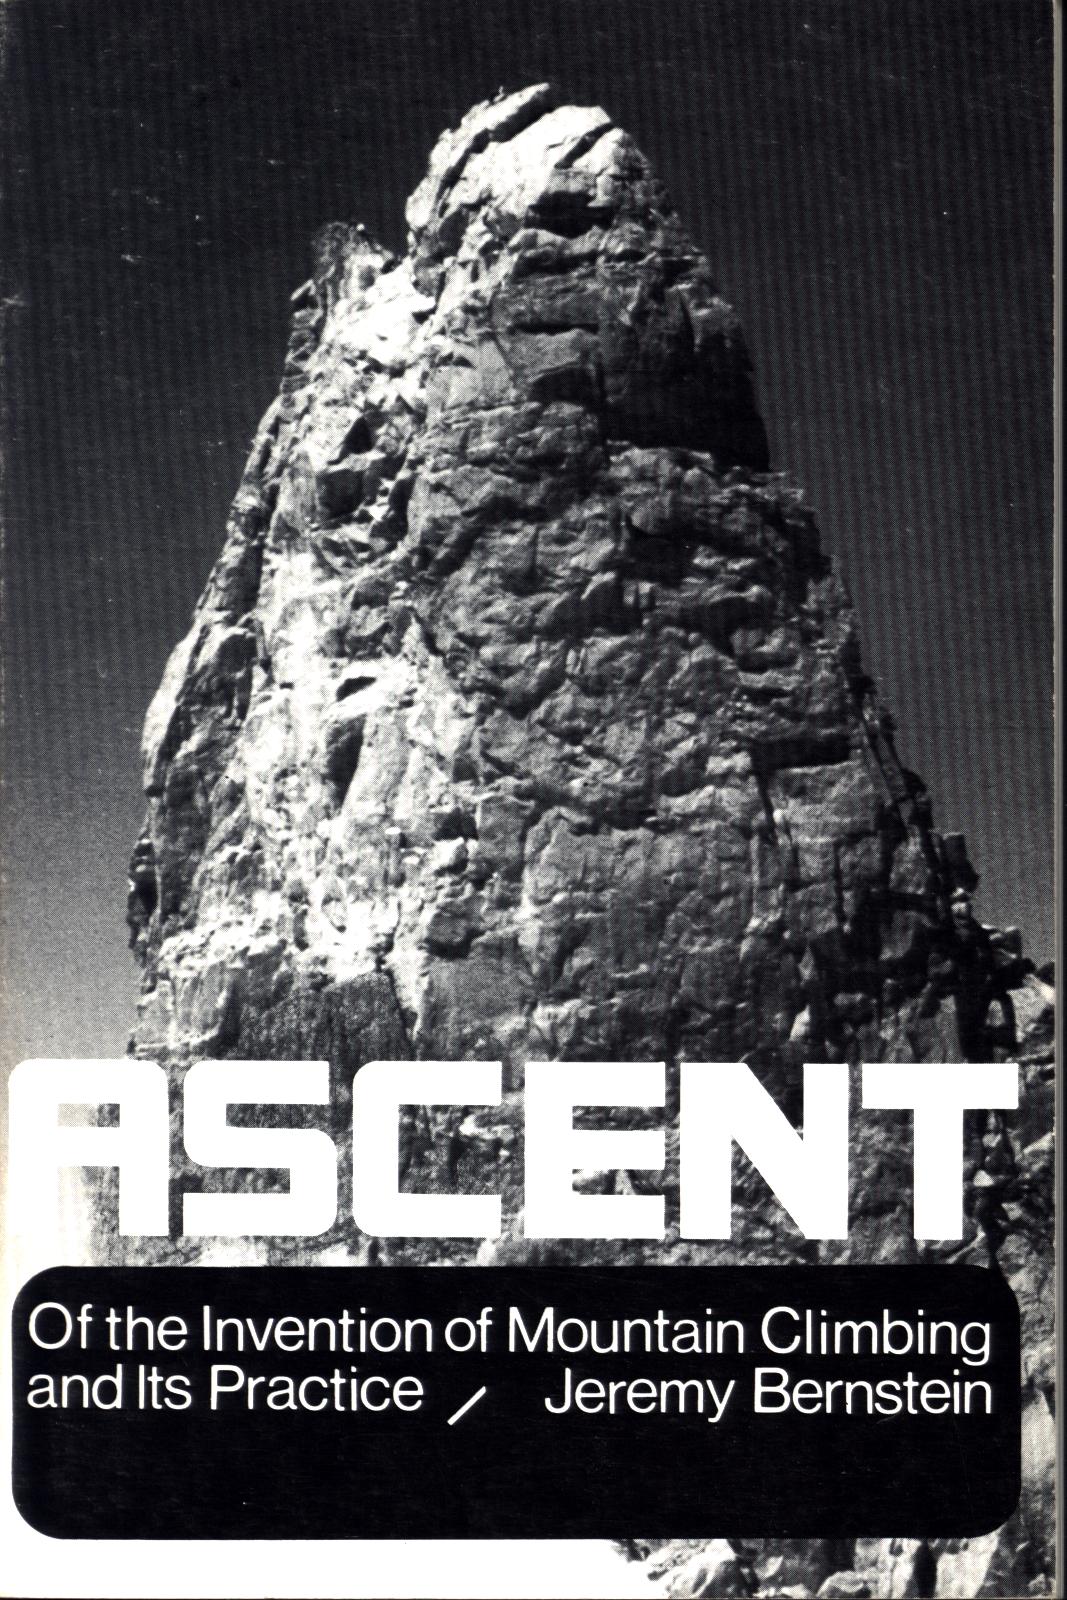 ASCENT: of the invention of mountain climbing and its practice. 